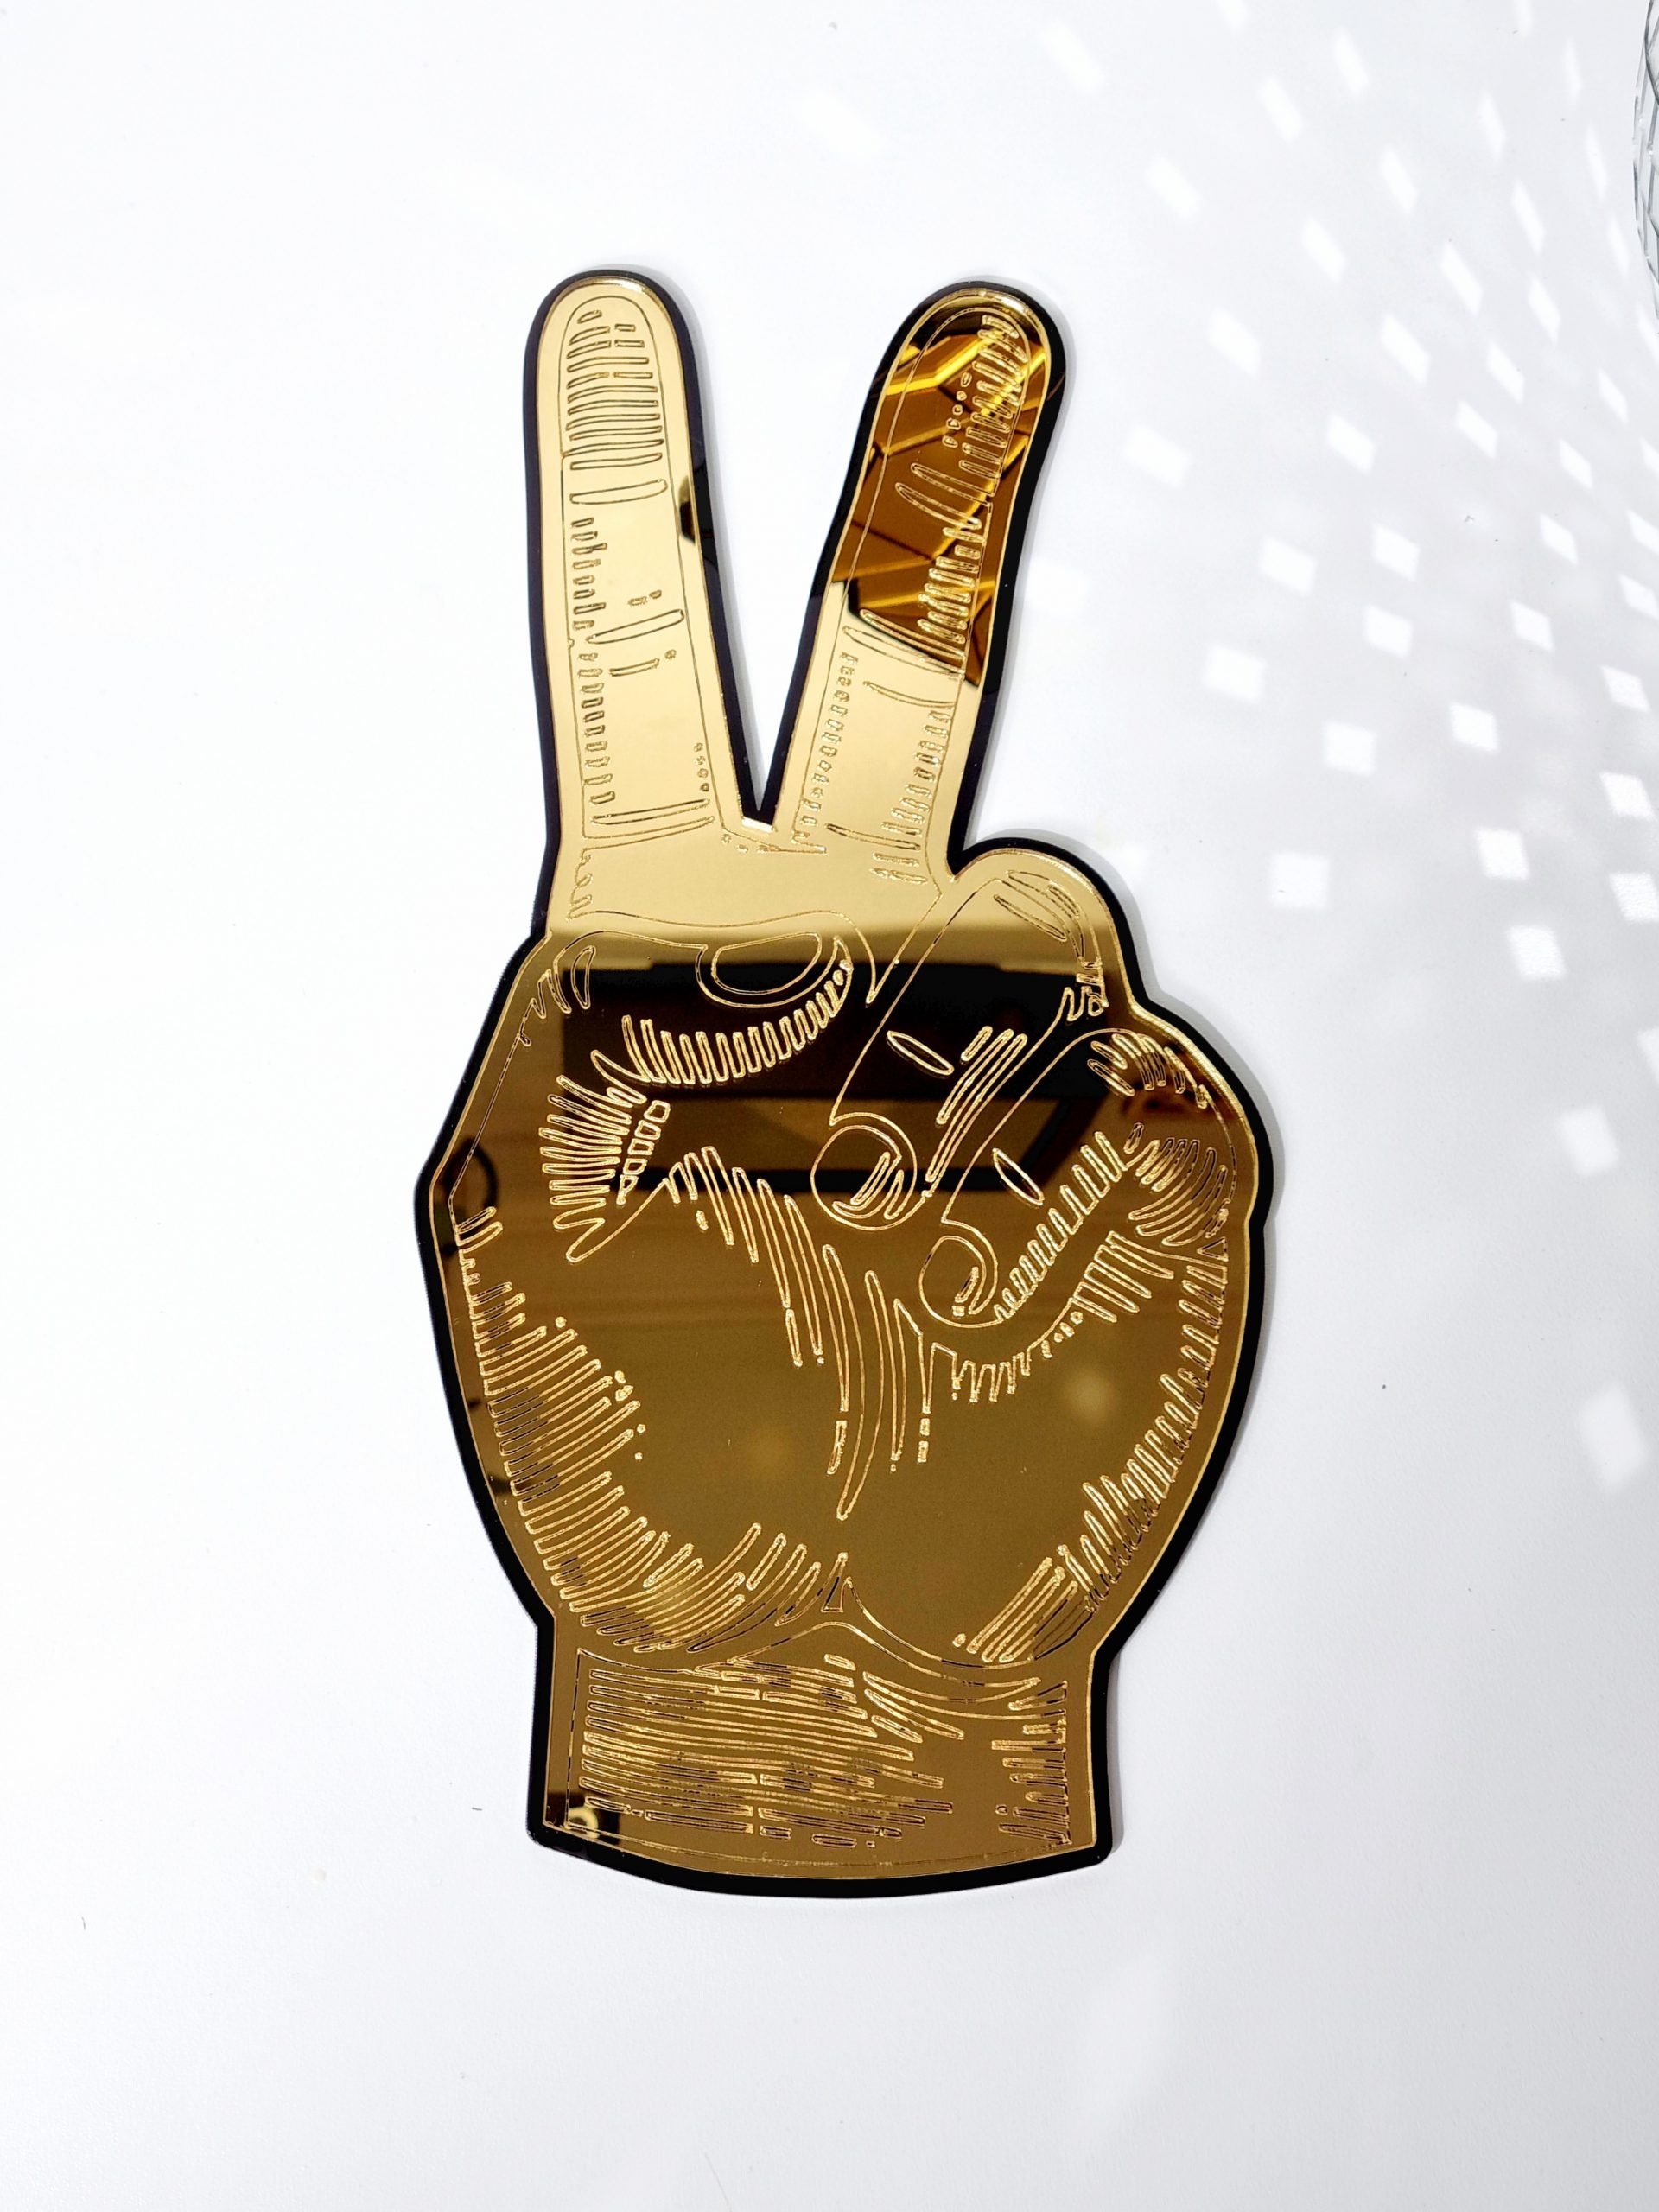 A gold mirror in the shape of a hand giving the peace sign. The mirror is gold with a black outline and has details engraved from underneath.